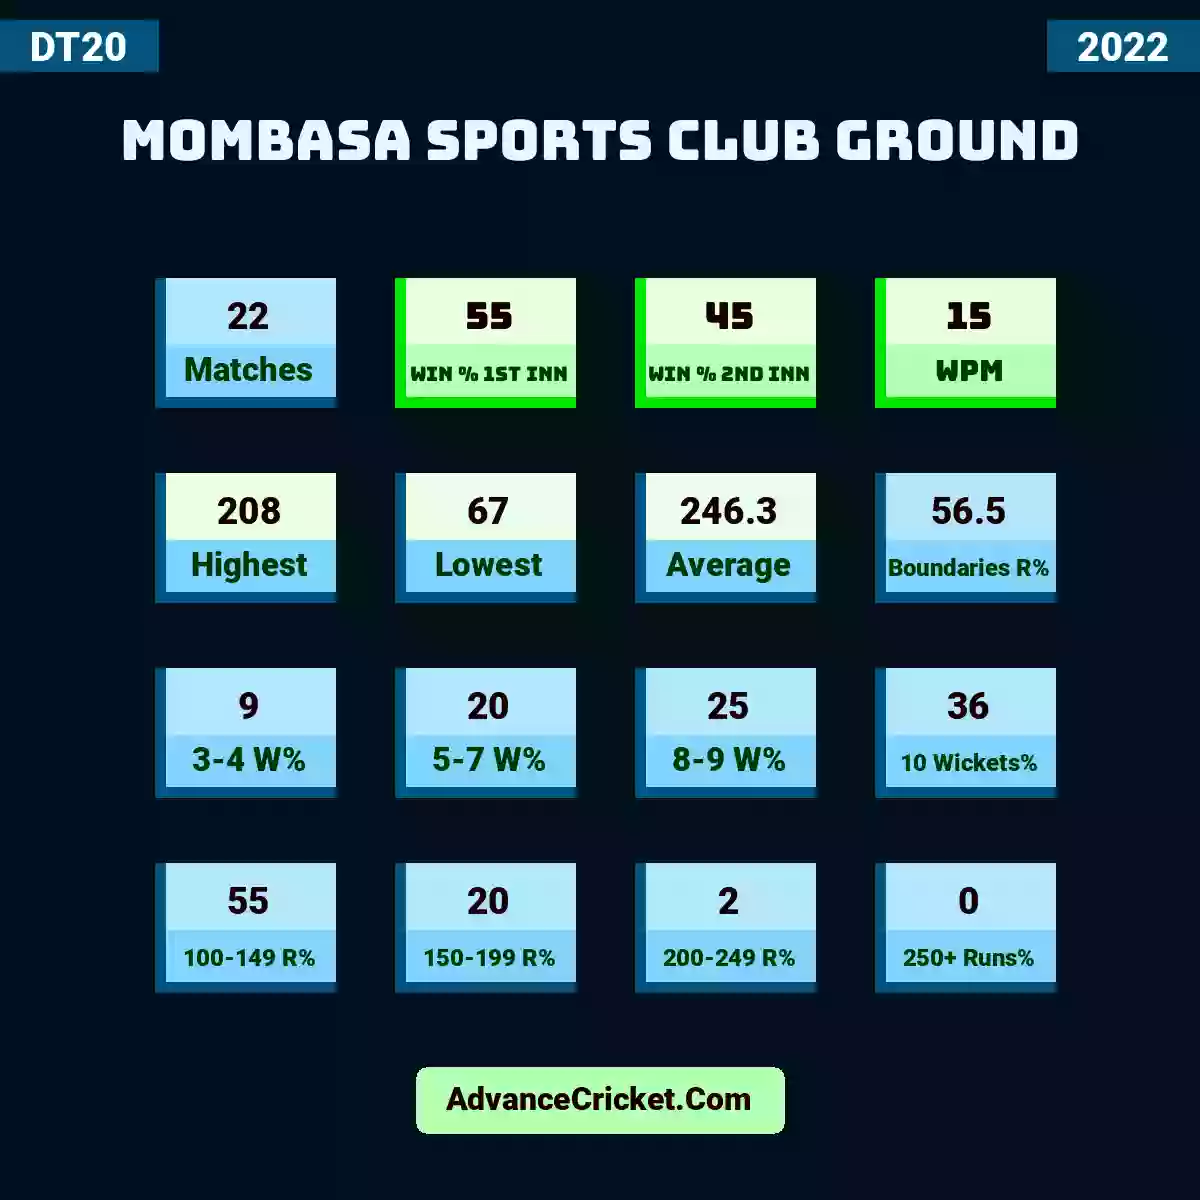 Image showing Mombasa Sports Club Ground with Matches: 22, Win % 1st Inn: 55, Win % 2nd Inn: 45, WPM: 15, Highest: 208, Lowest: 67, Average: 246.3, Boundaries R%: 56.5, 3-4 W%: 9, 5-7 W%: 20, 8-9 W%: 25, 10 Wickets%: 36, 100-149 R%: 55, 150-199 R%: 20, 200-249 R%: 2, 250+ Runs%: 0.